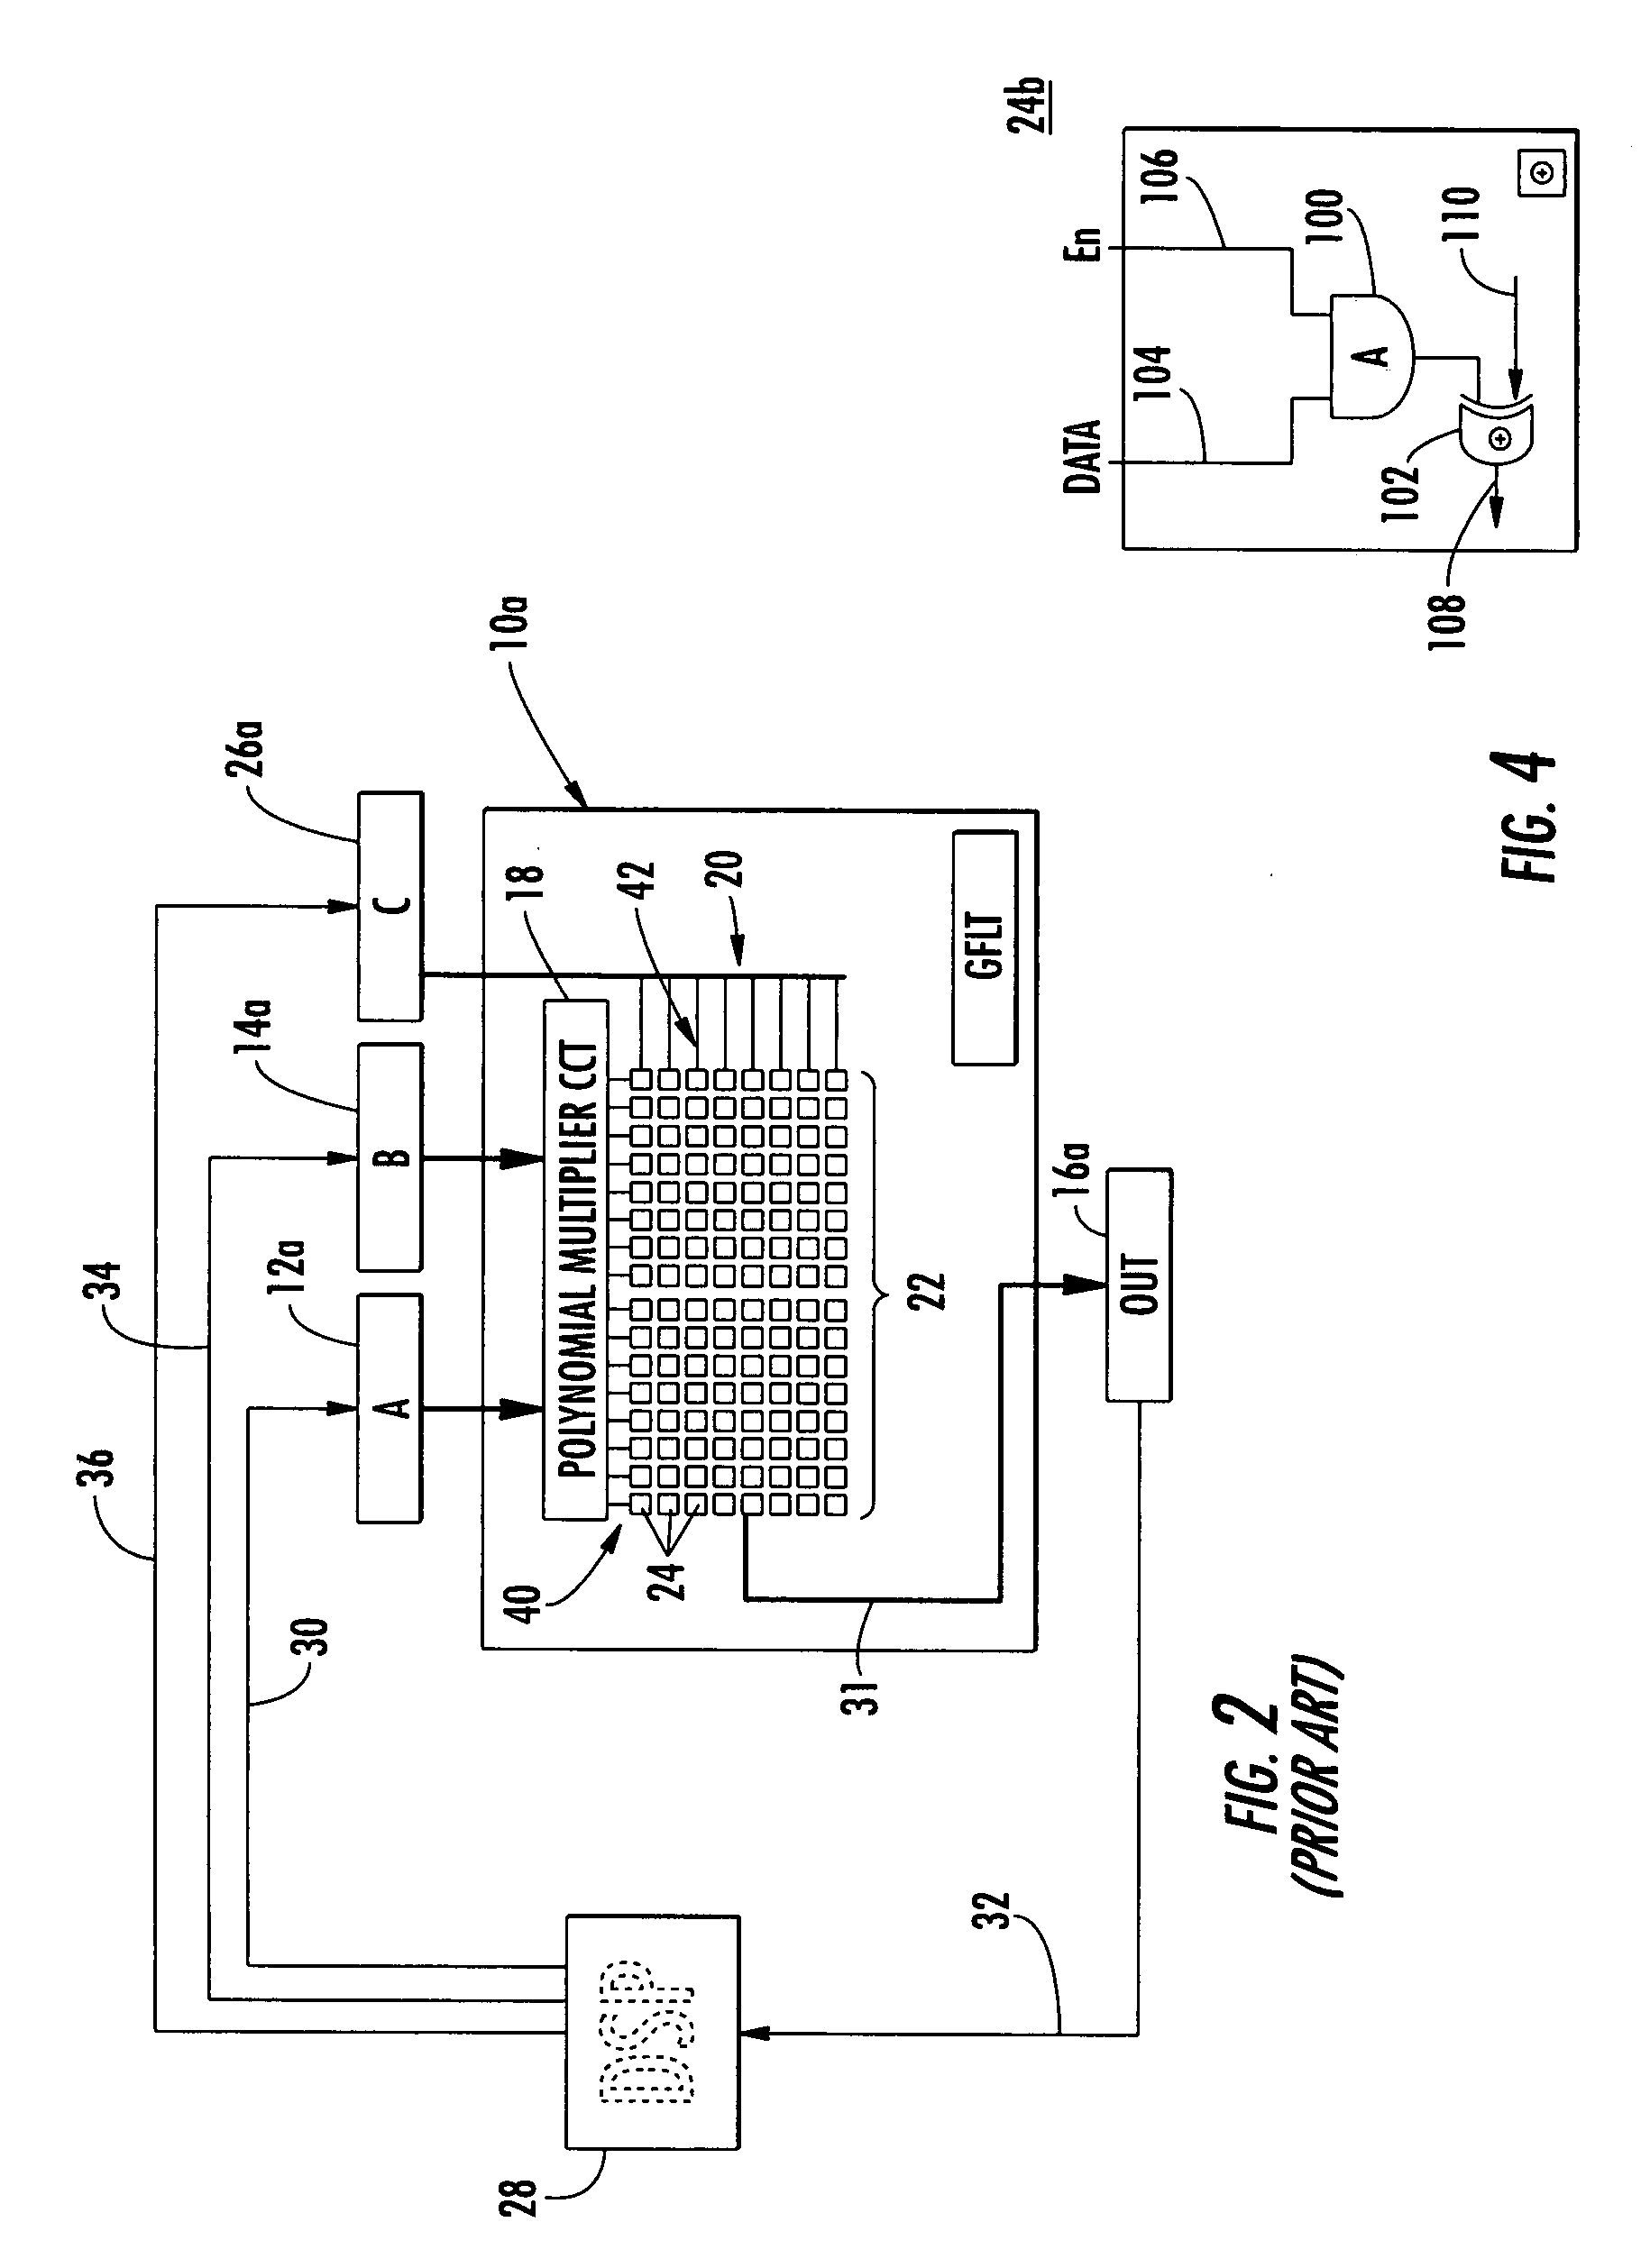 Compound galois field engine and galois field divider and square root engine and method